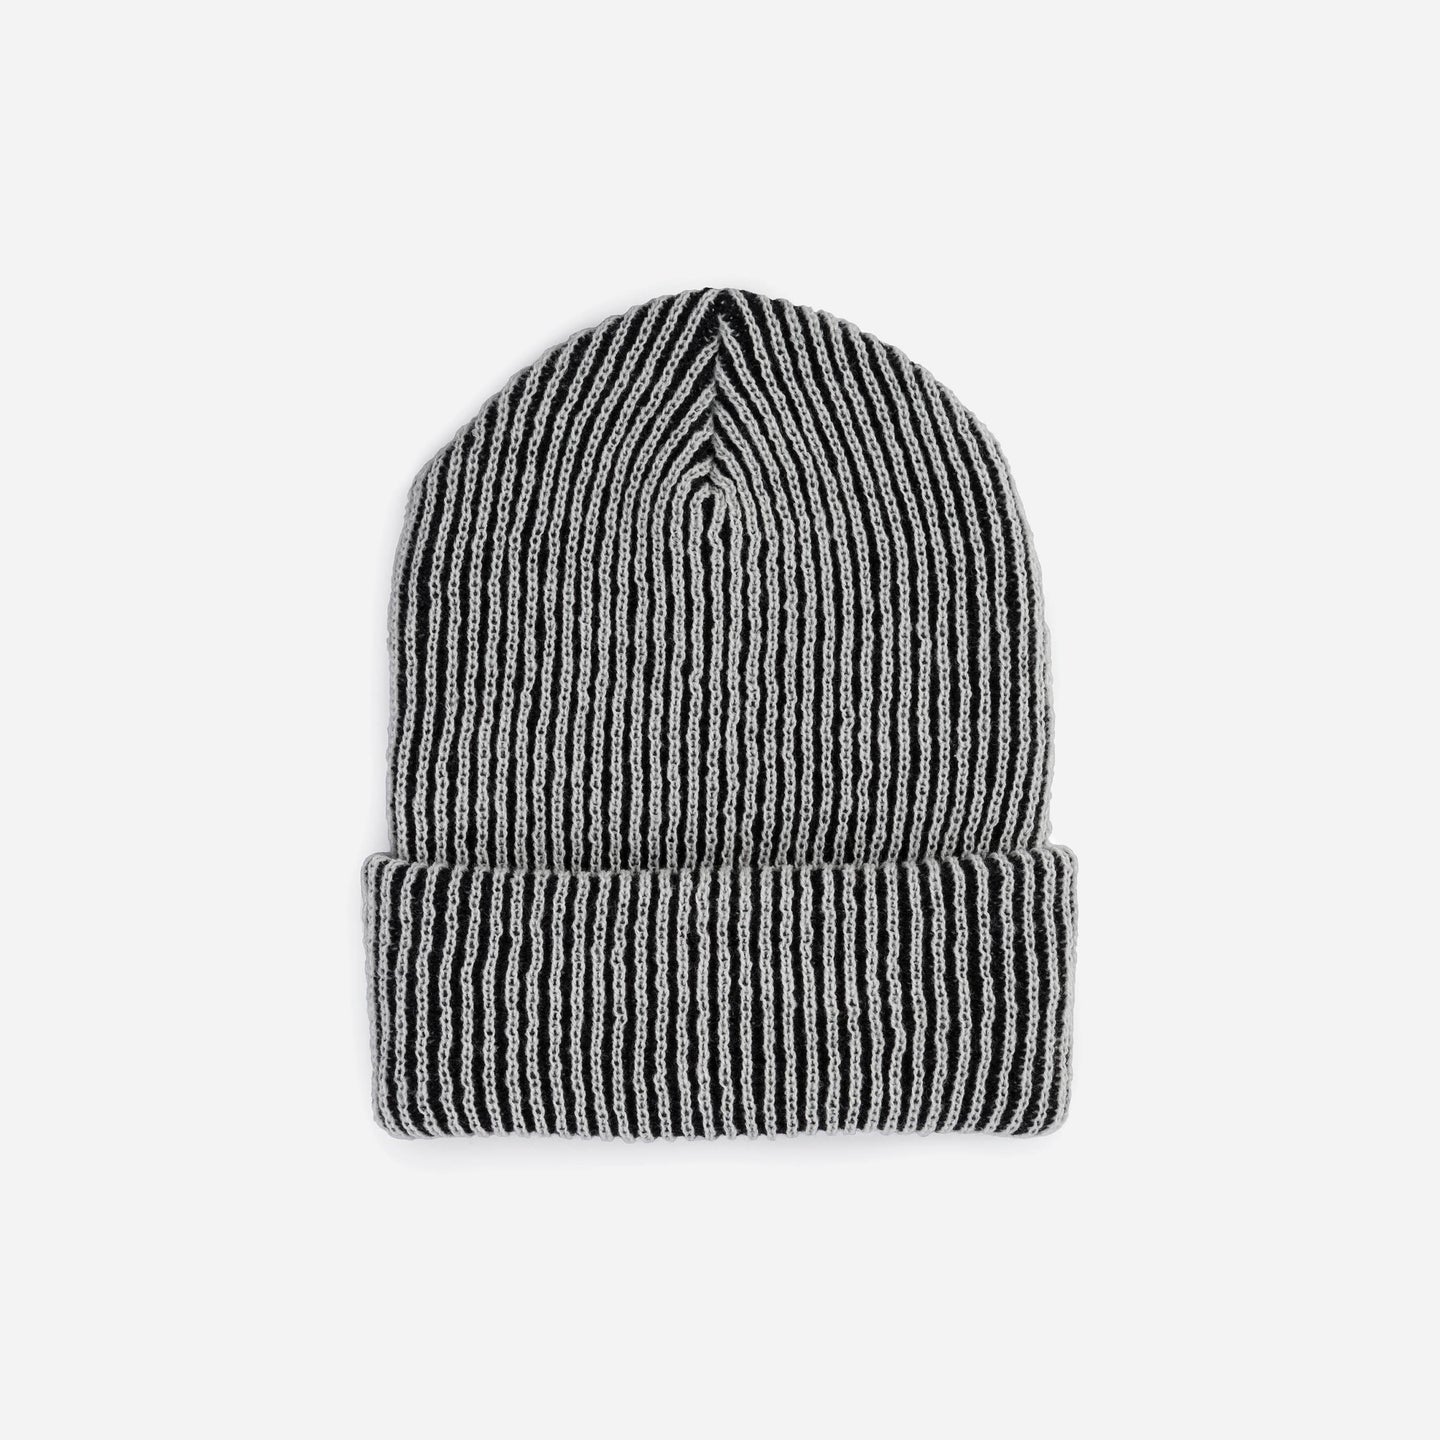 Simple Rib Hat Contrast Stripe Slouchy Beanie Knit Unisex mens one size